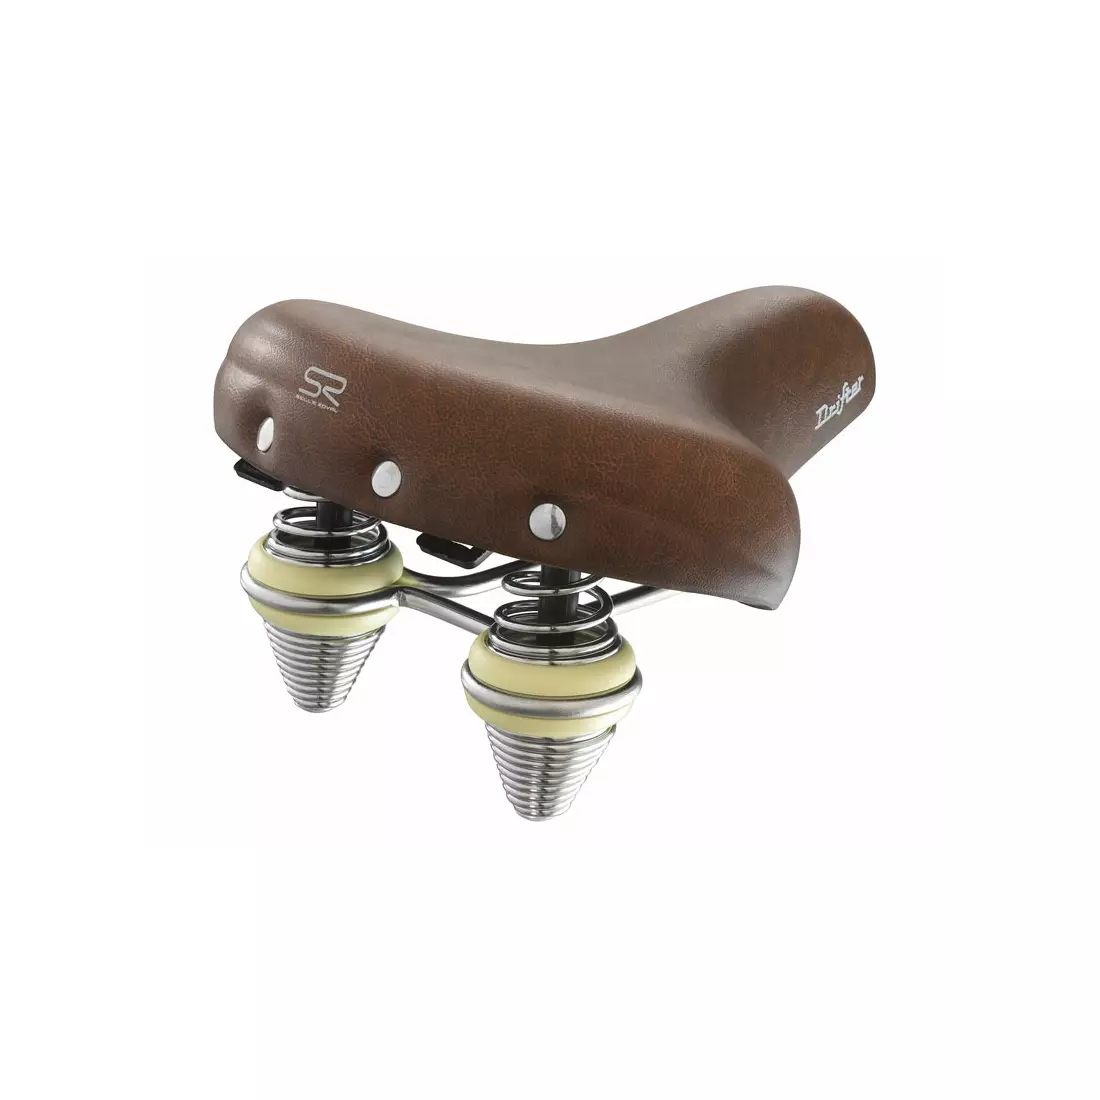 Bicycle saddle SELLEROYAL PREMIUM RELAXED 90st. DRIFTER MEDIUM BROWN unisex gel + springs SR-5167UD0A08129